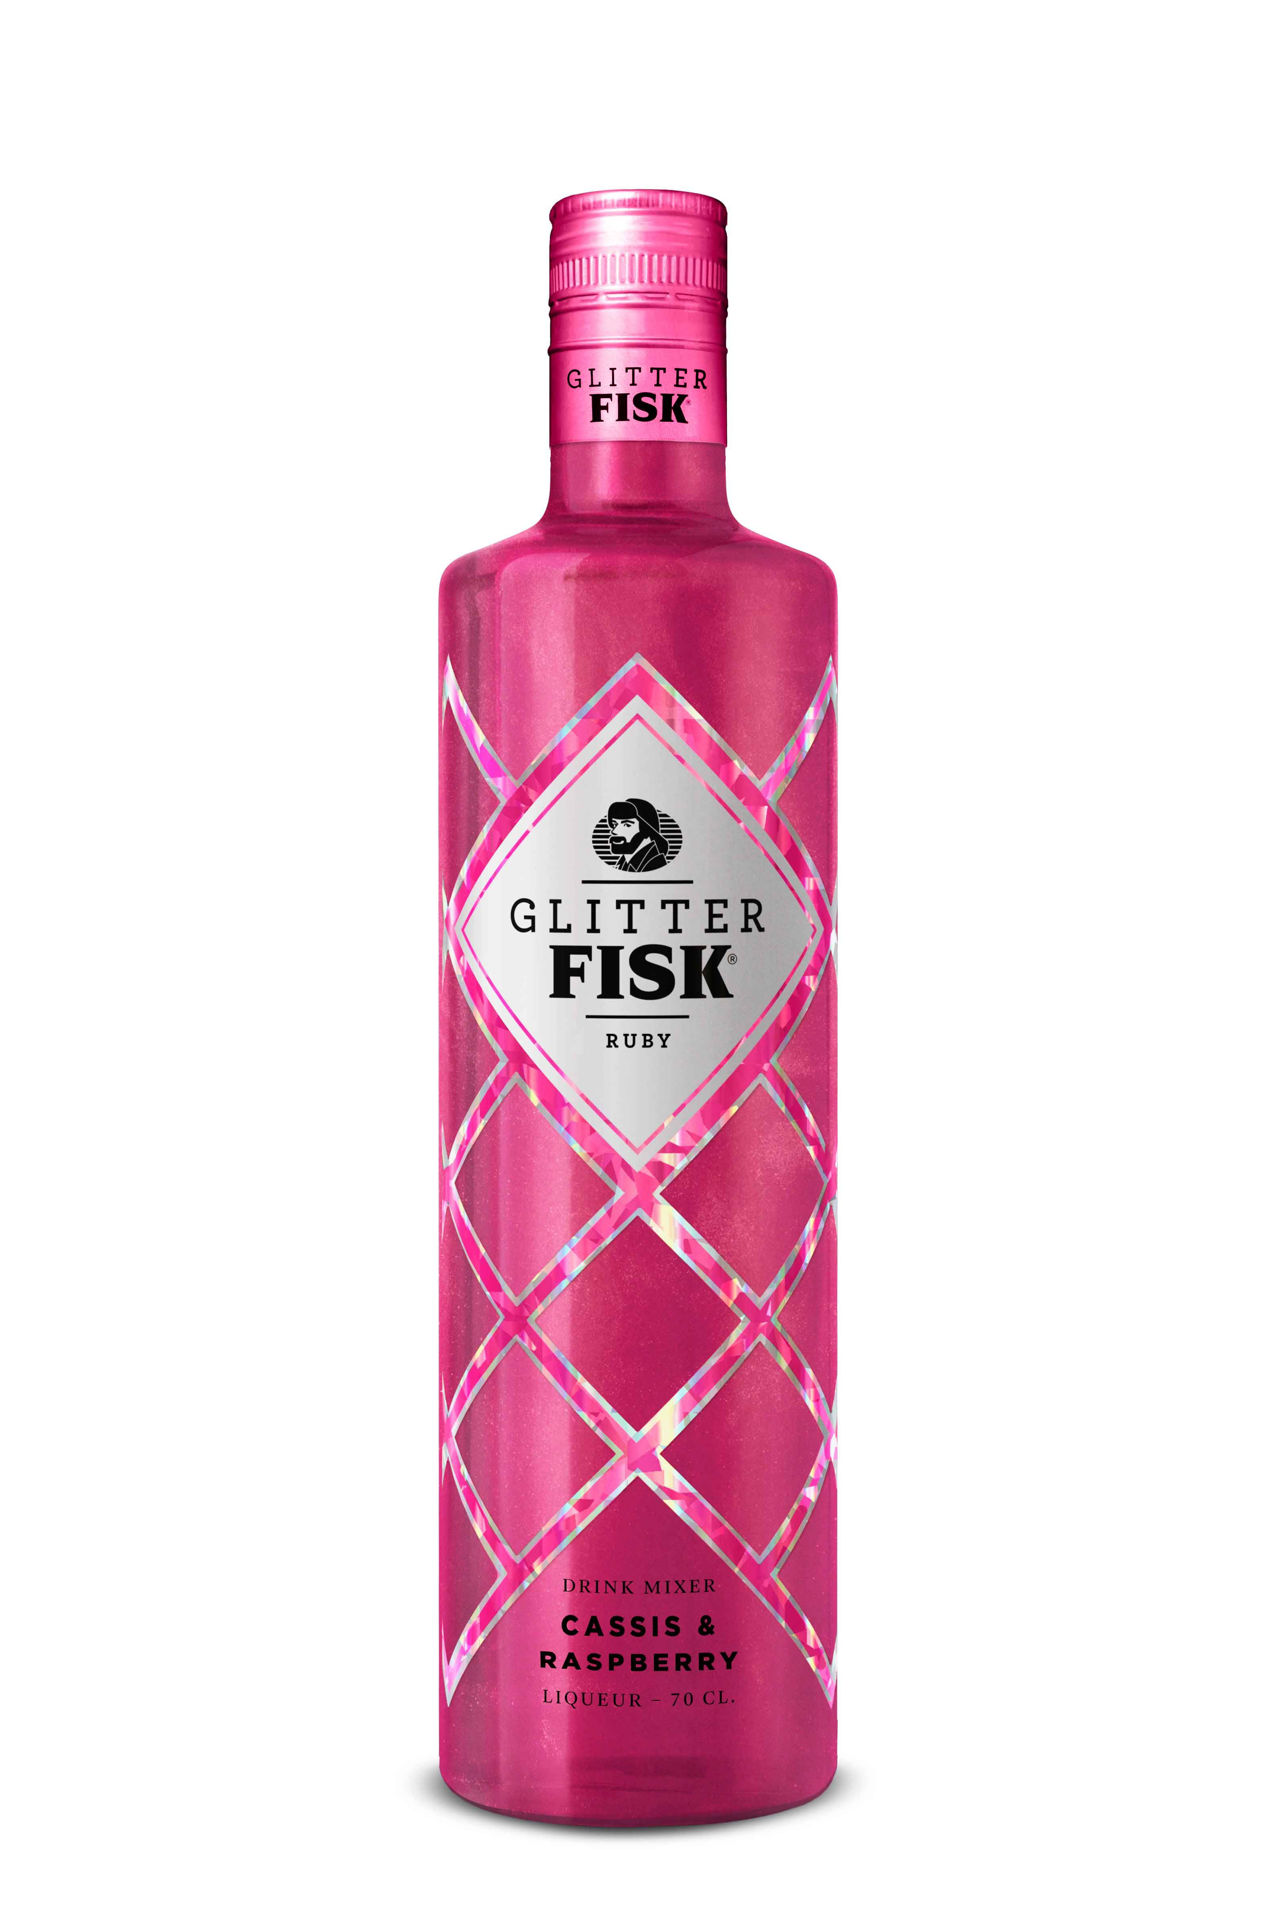 Glitter Fisk - Sparkling recipes (English) by United Drinks A/S - Issuu